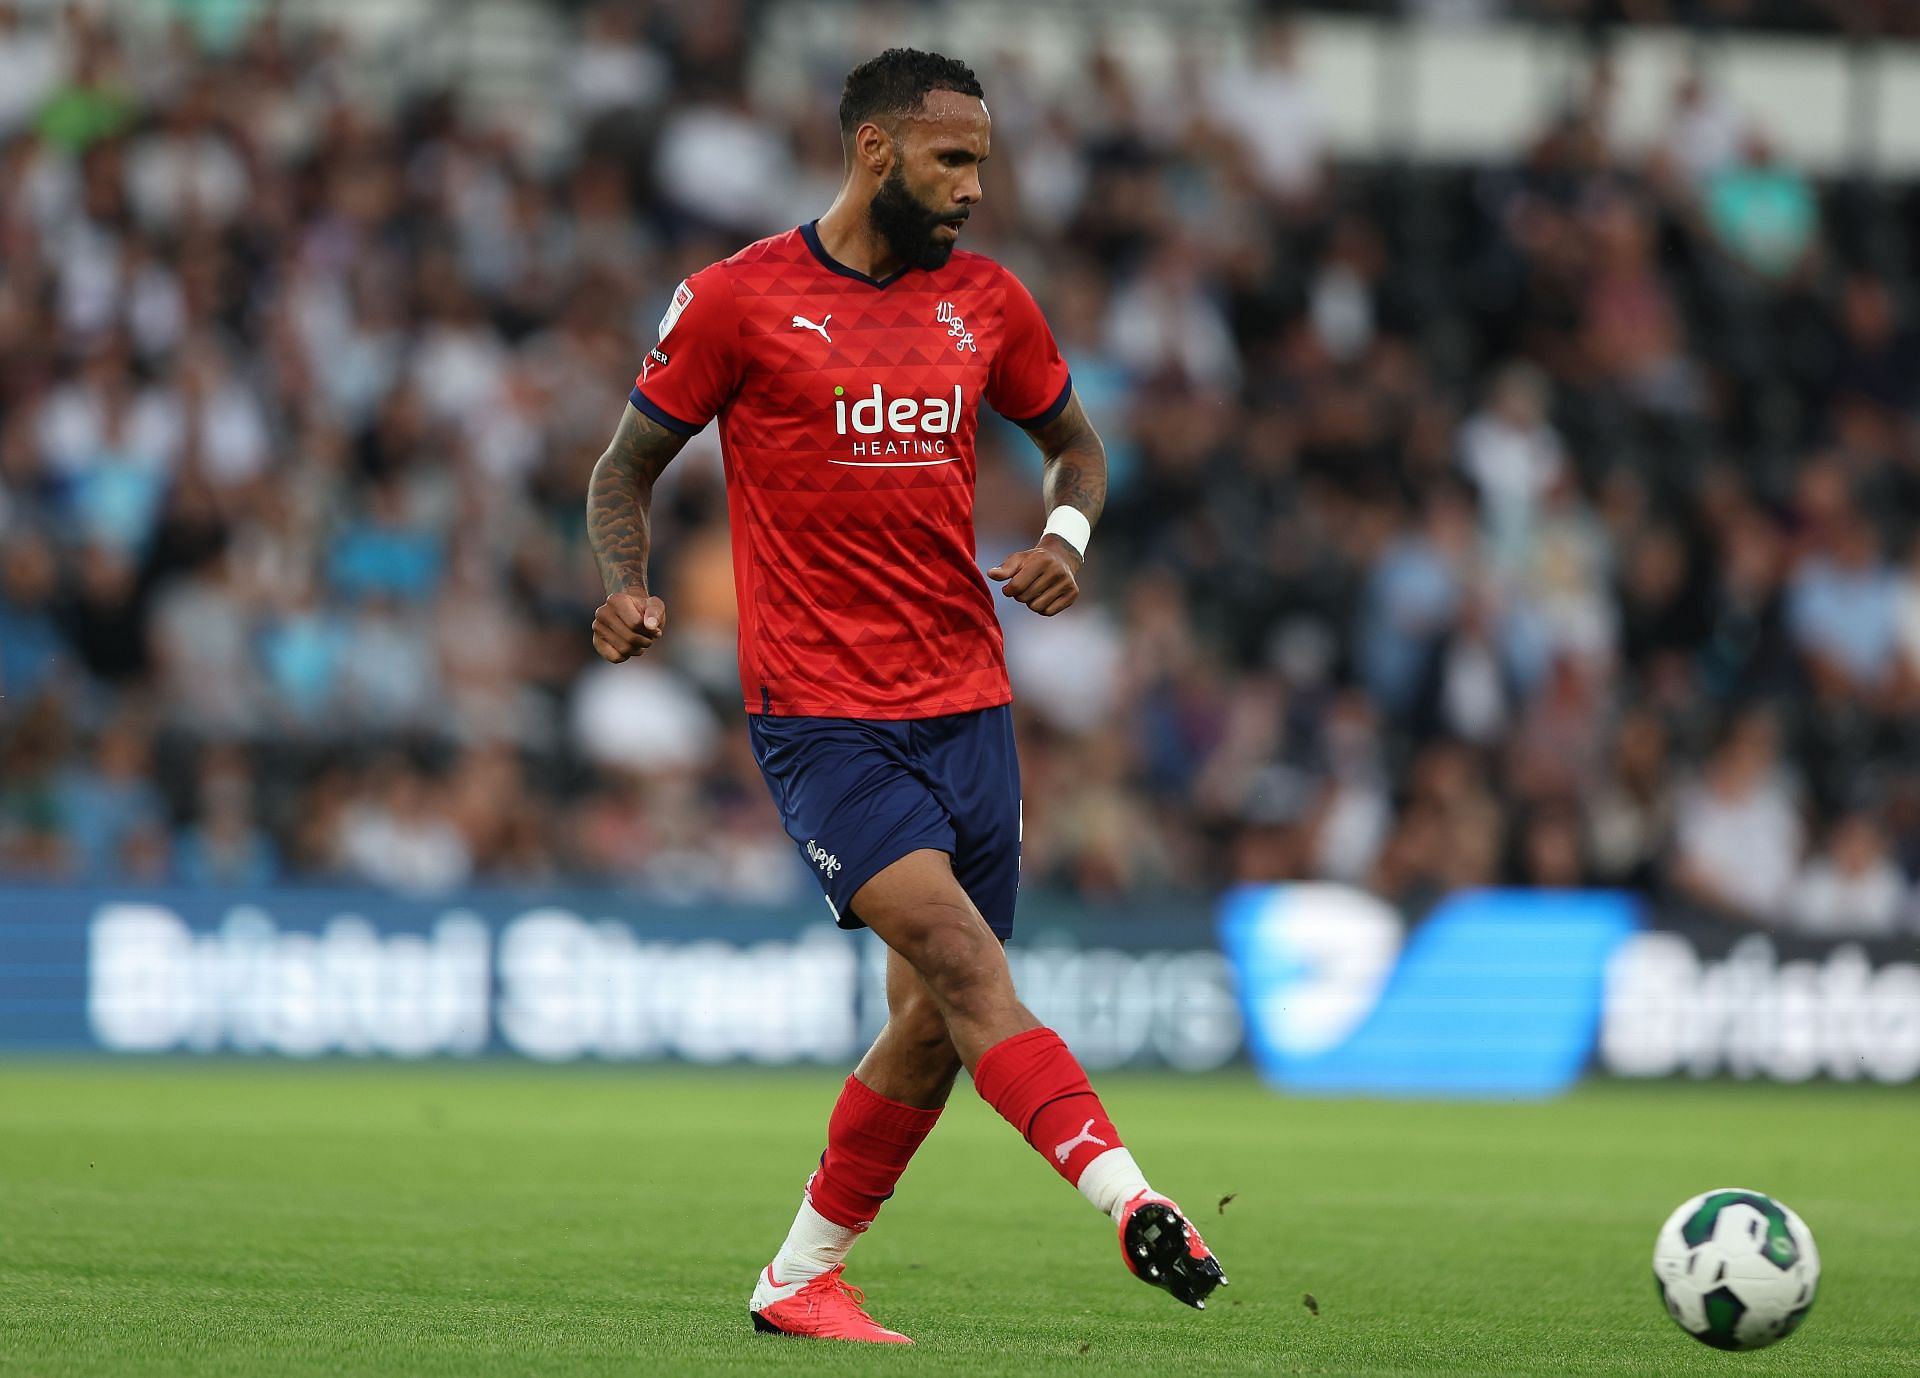 Derby County v West Bromwich Albion - Carabao Cup Second Round